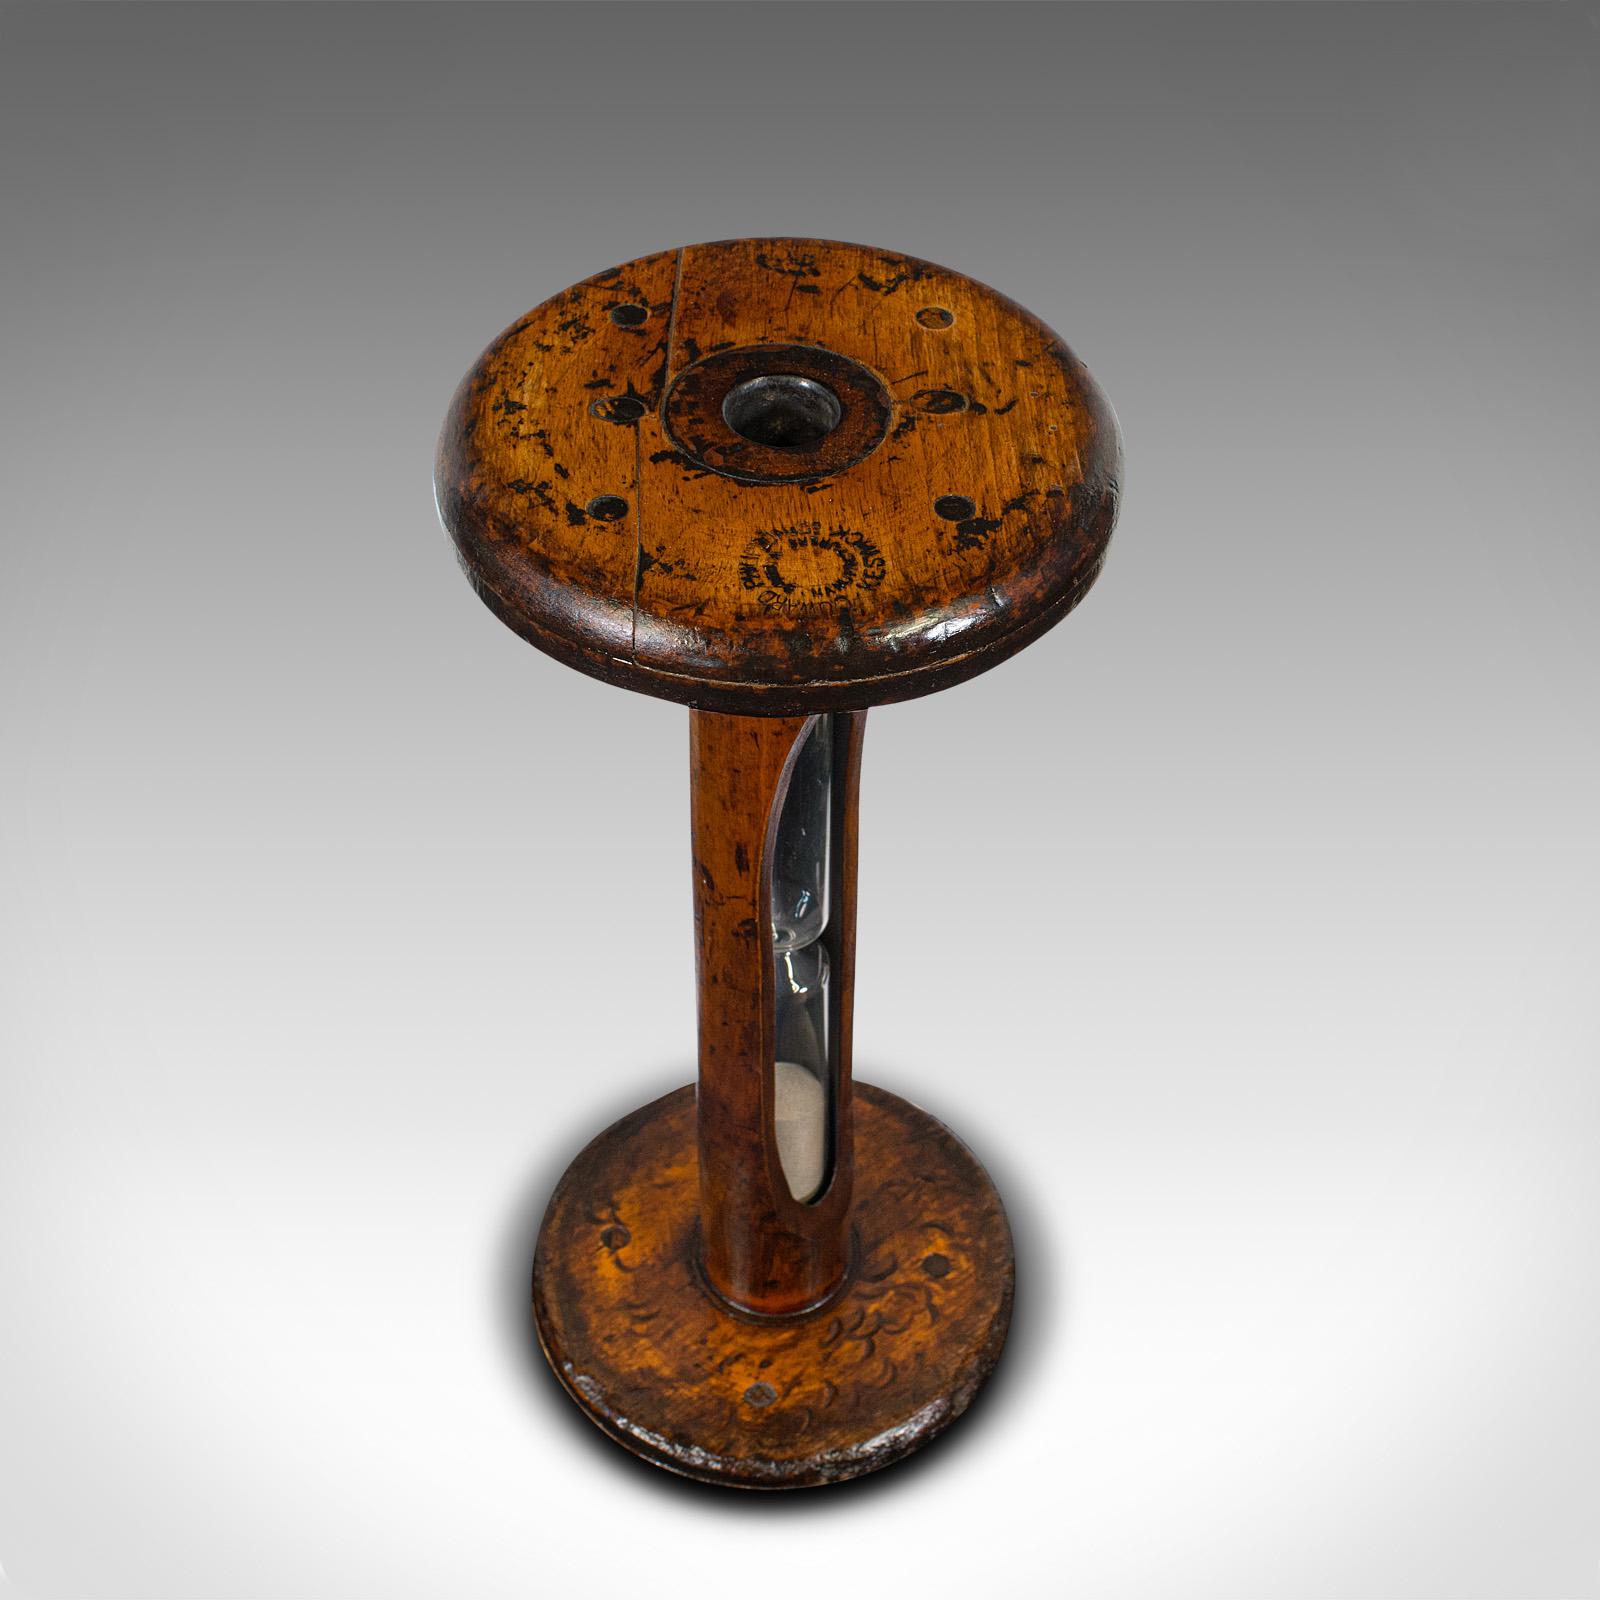 Antique Cookie Baking Sand Timer, English, Fruitwood, Glass, Victorian, C.1900 1